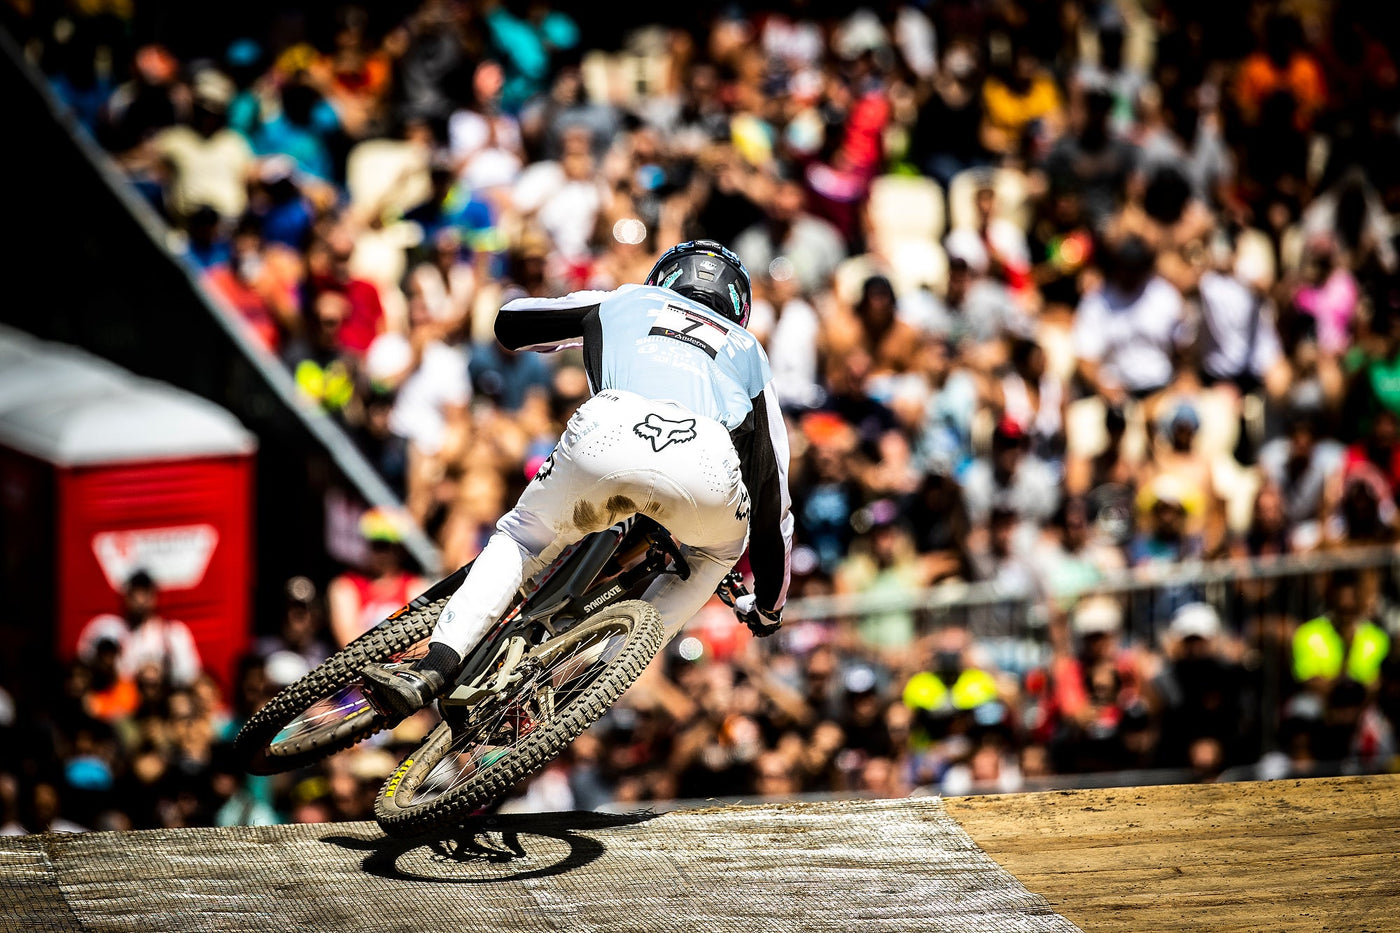 UCI DH #5: Vergier clinches first win!